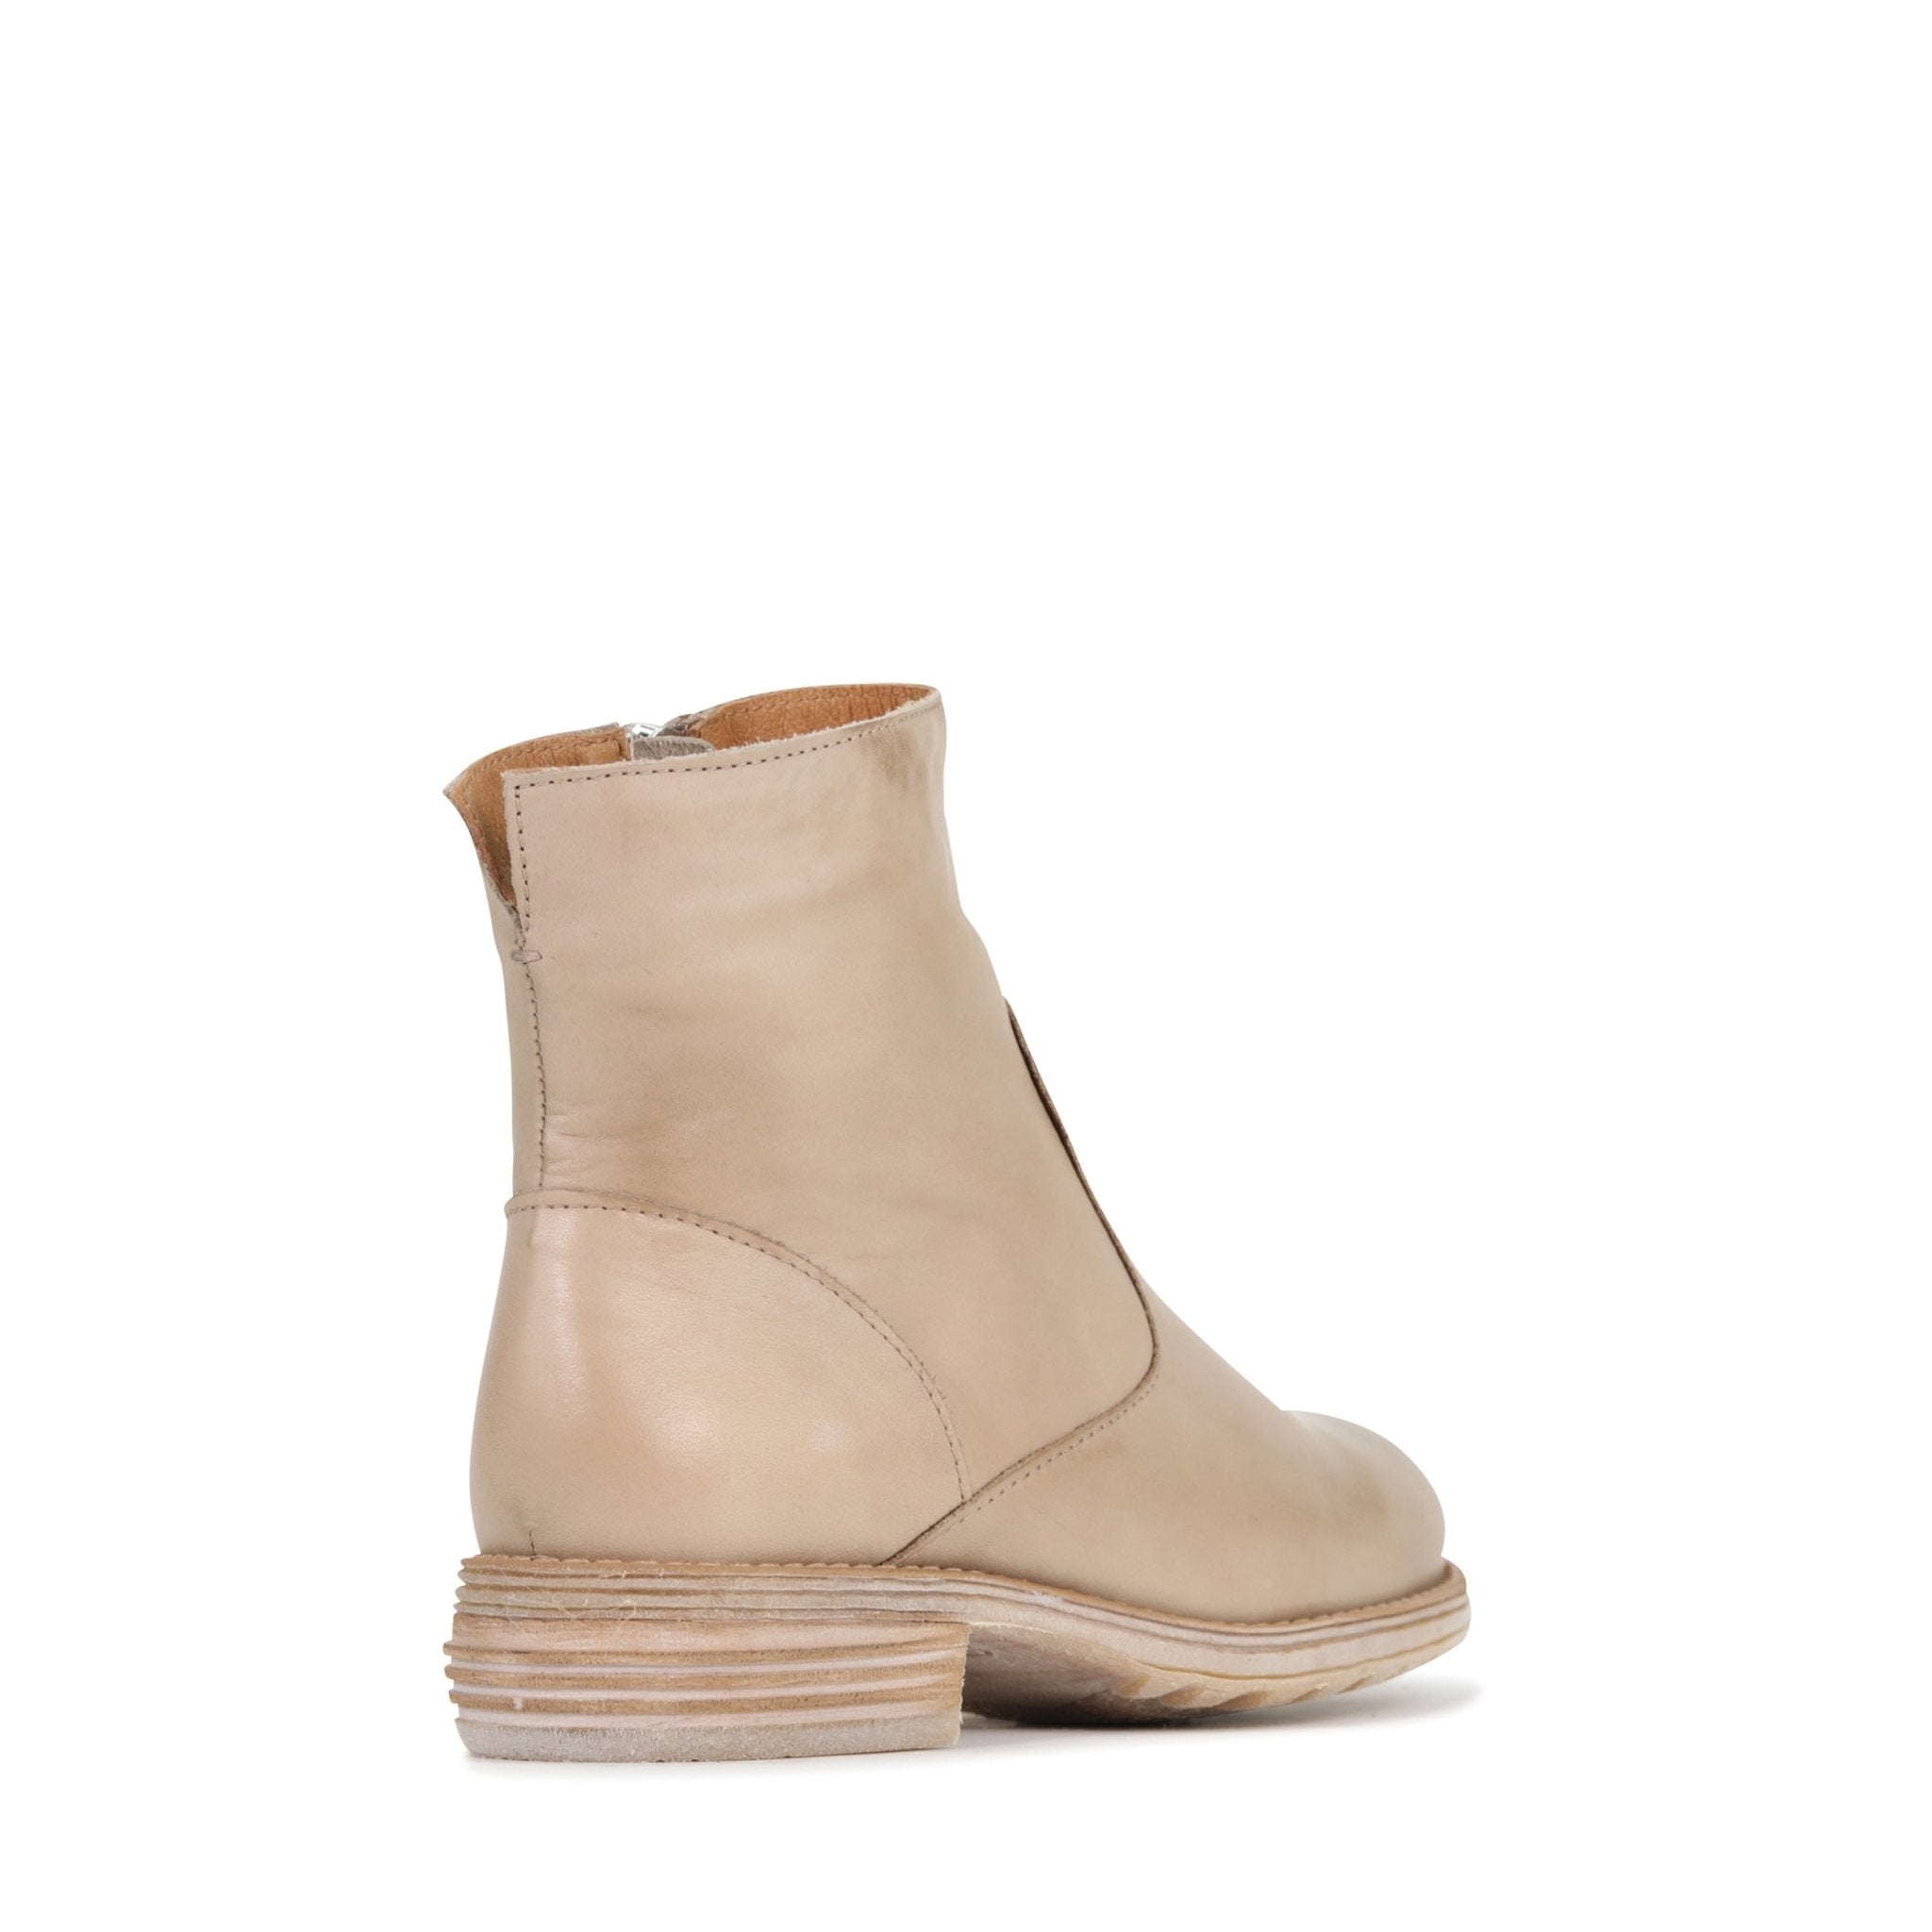 ZESPA - EOS Footwear - Ankle Boots #color_Taupe